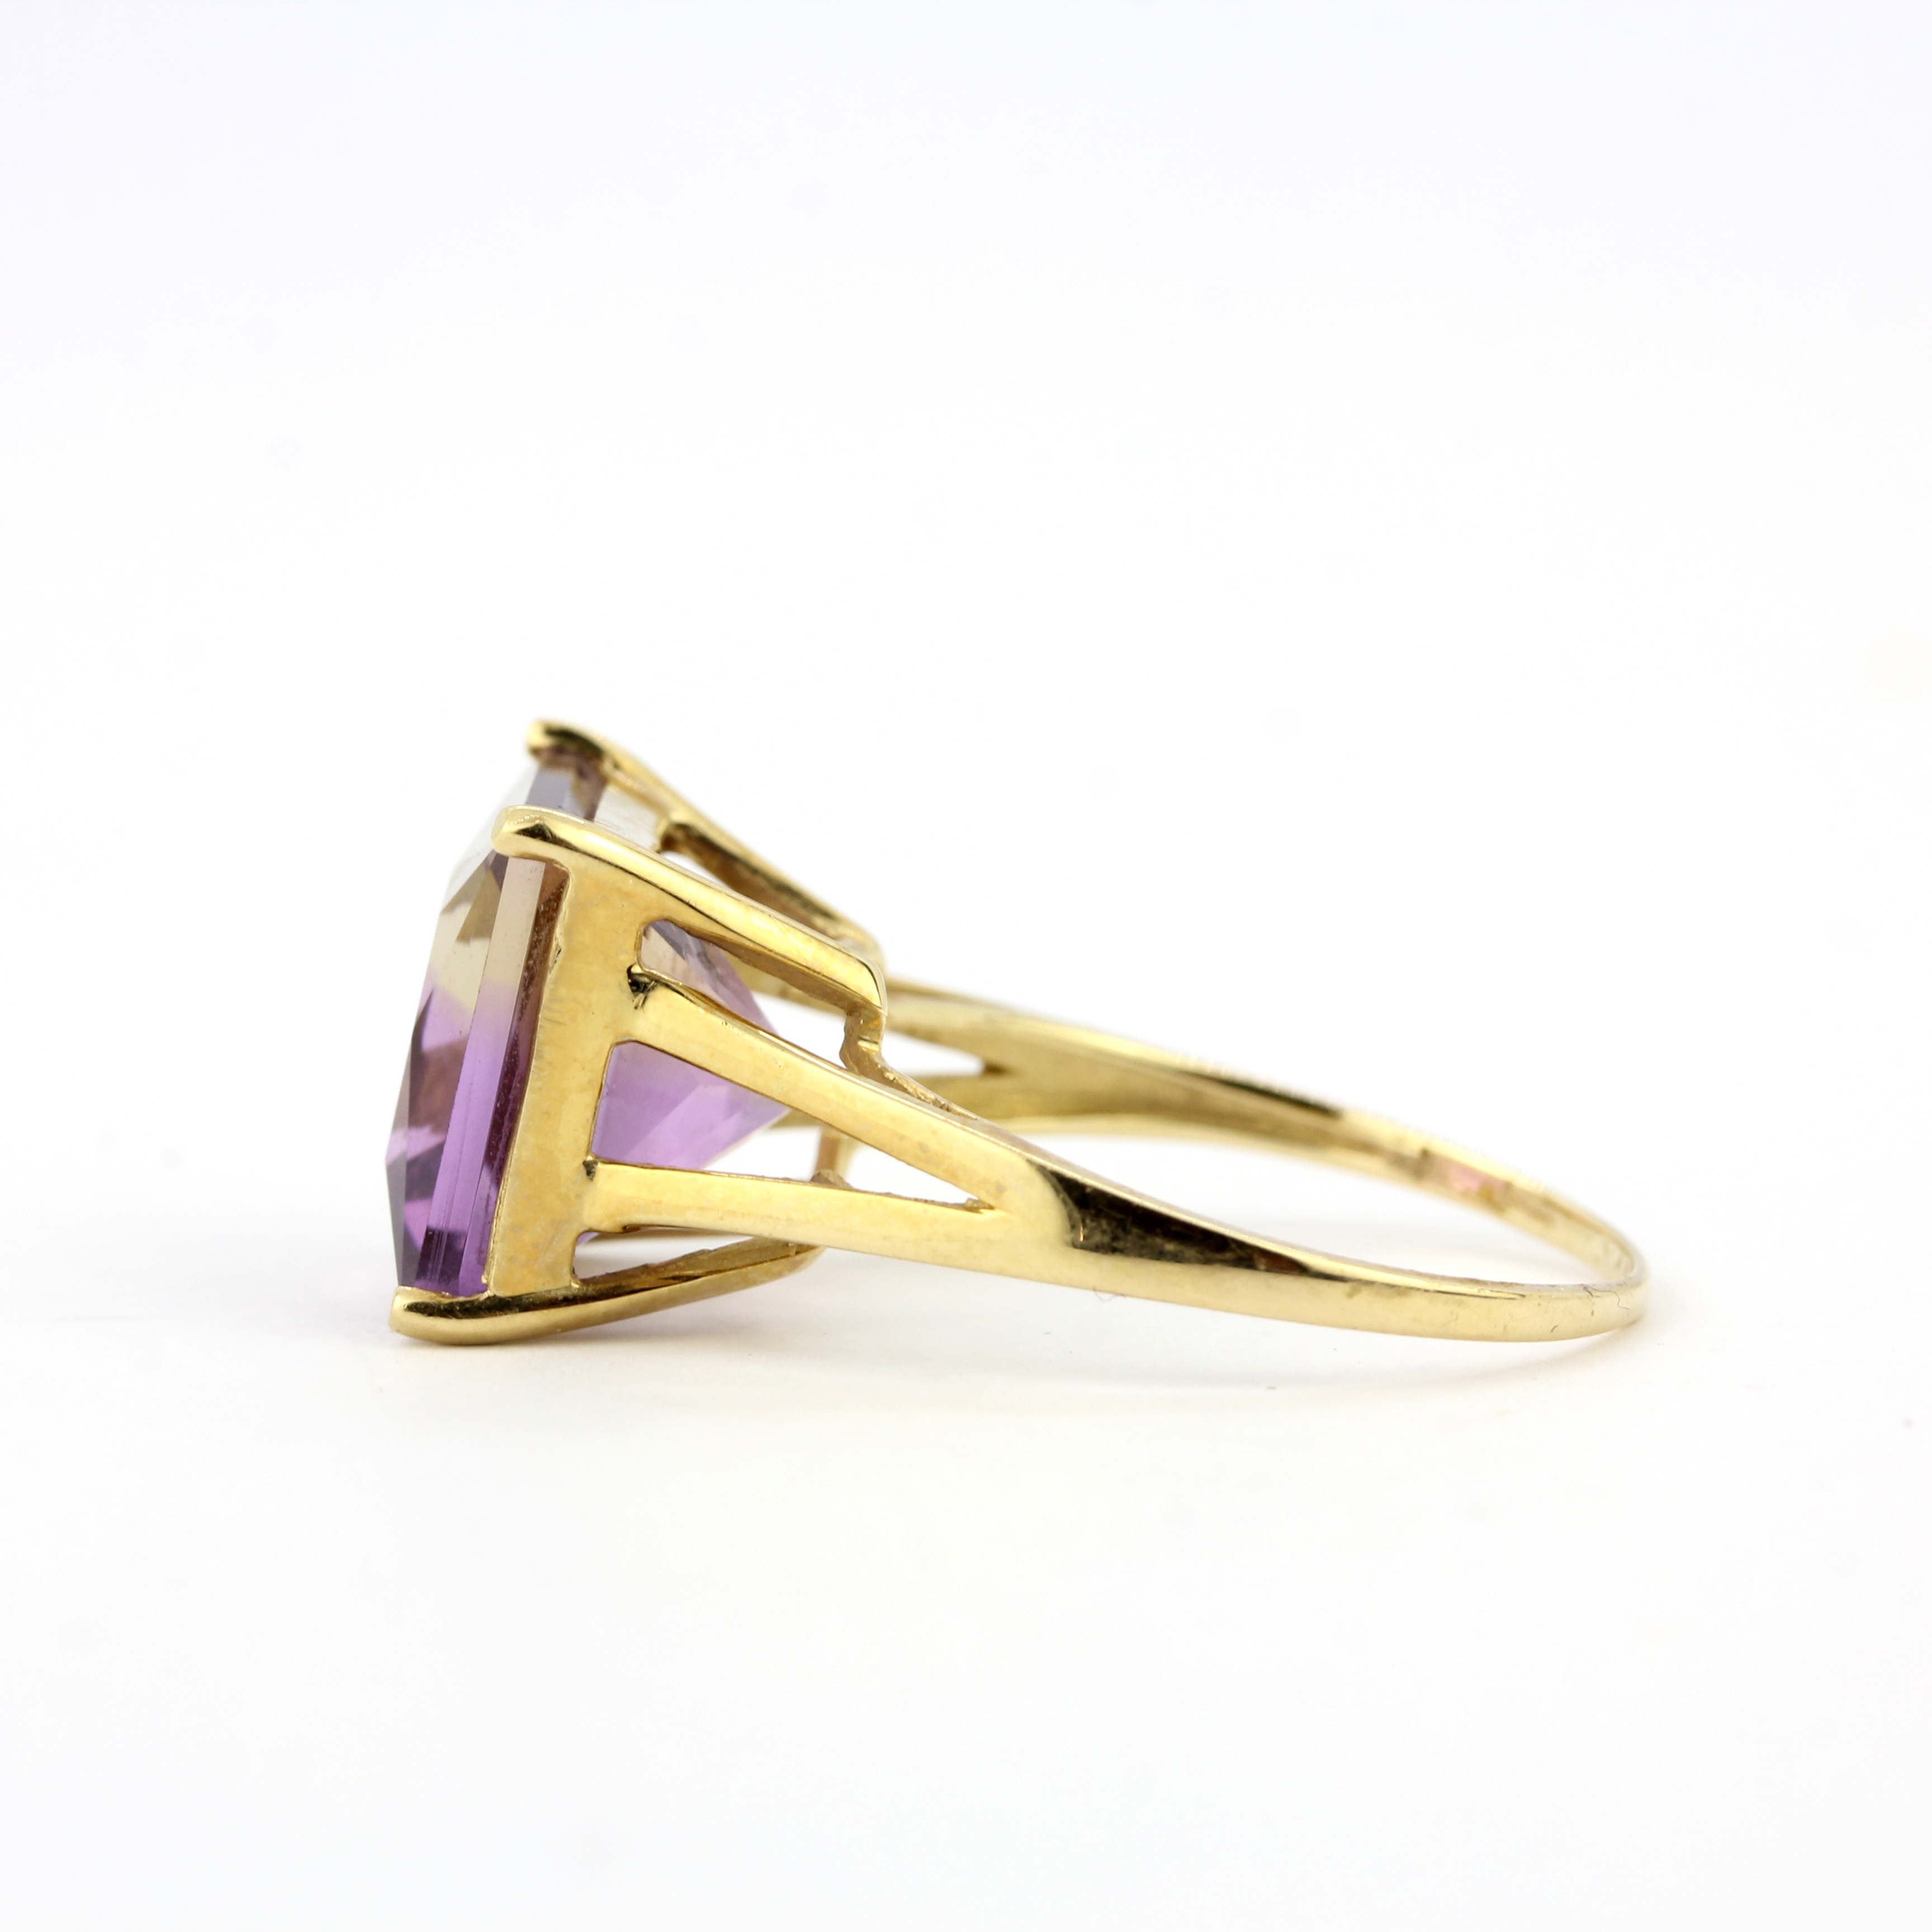 A 9ct yellow gold ring set with a fancy cut ametrine, ring size S. - Image 2 of 3